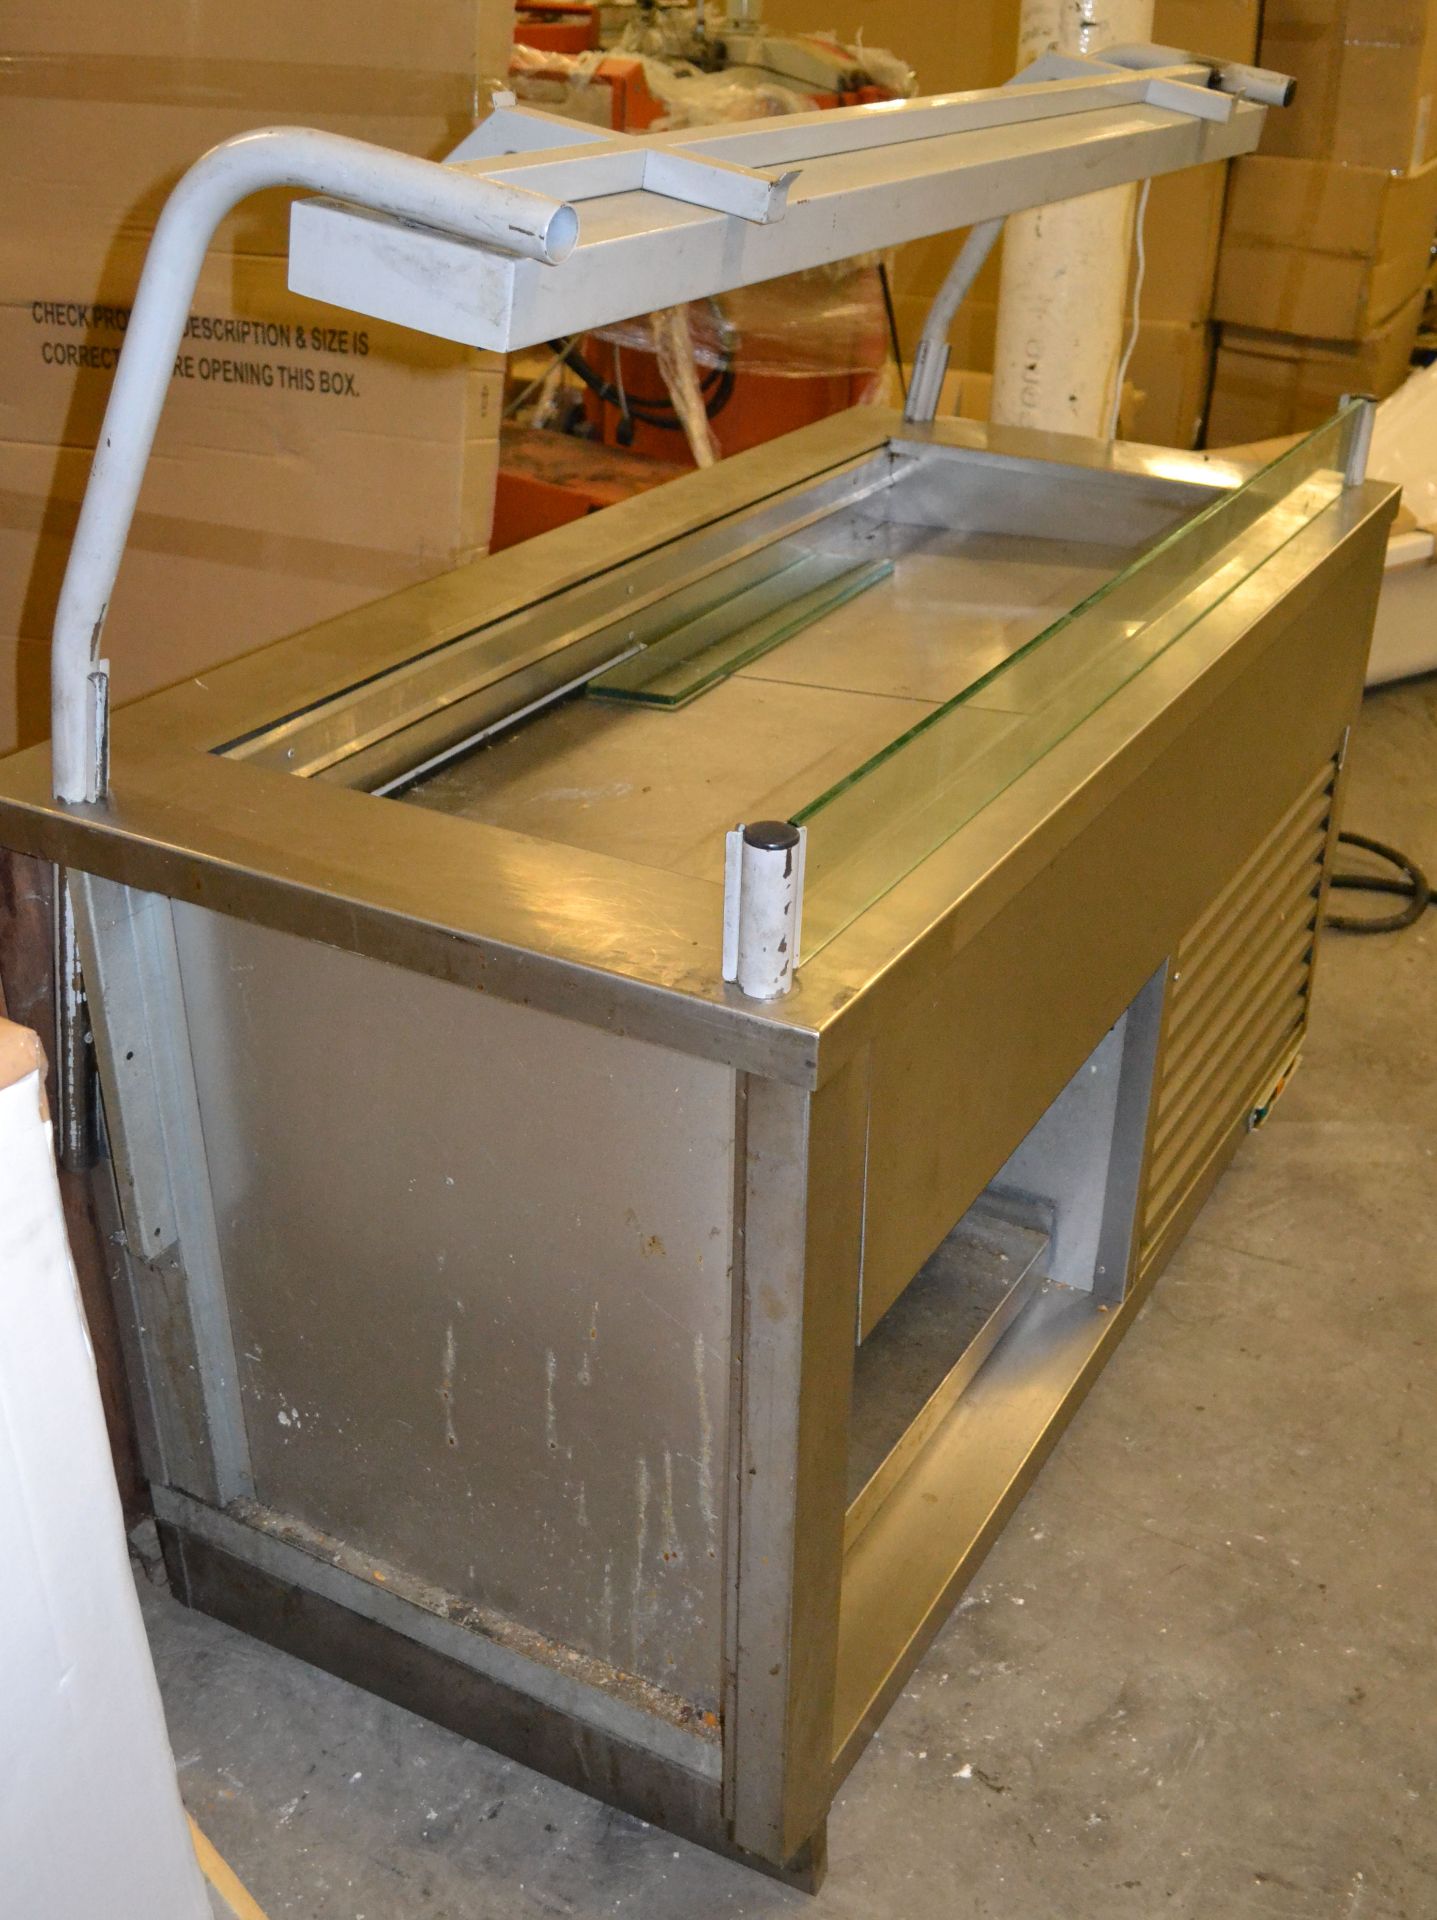 1 x Advanced Catering Equipment 1500BADW 240V Chilled Counter - Details to follow - Ref: FJC011 - - Image 4 of 10